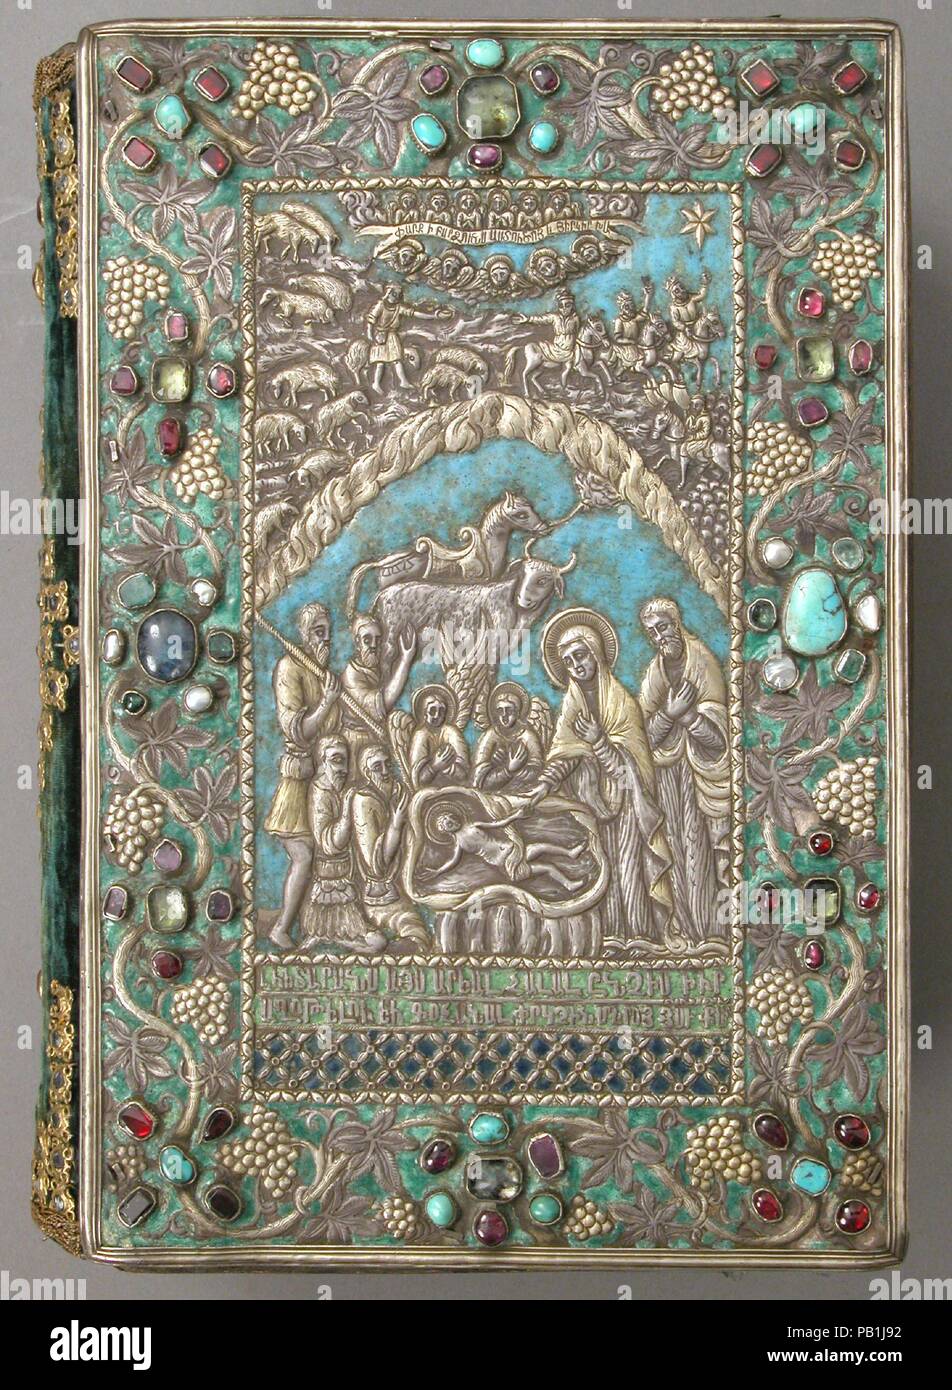 Gospel with Silver Cover. Dimensions: Pages: H. 10 in. (25.4 cm)   W. 6 3/4 in. (17.1 cm)  Binding: H. 10 1/4 in. (26 cm)   W. 7 3/8 in. (18.7 cm)  Approx. opening with cradle: H. 10 1/4 in. (26 cm)   W. 13 3/4 in. (34.9 cm)   D. 8 in. (20.3 cm). Date: 13th and 17th century.  These jeweled, enameled, and gilt-silver repoussé covers for a gospel are examples of the work produced in the late seventeenth-century silversmith workshop of Kayseri. Both front and back cover are signed, informing us that they were made in Kayseri in 1691 by Astuatsatur Shahamir. The central image on the front cover de Stock Photo